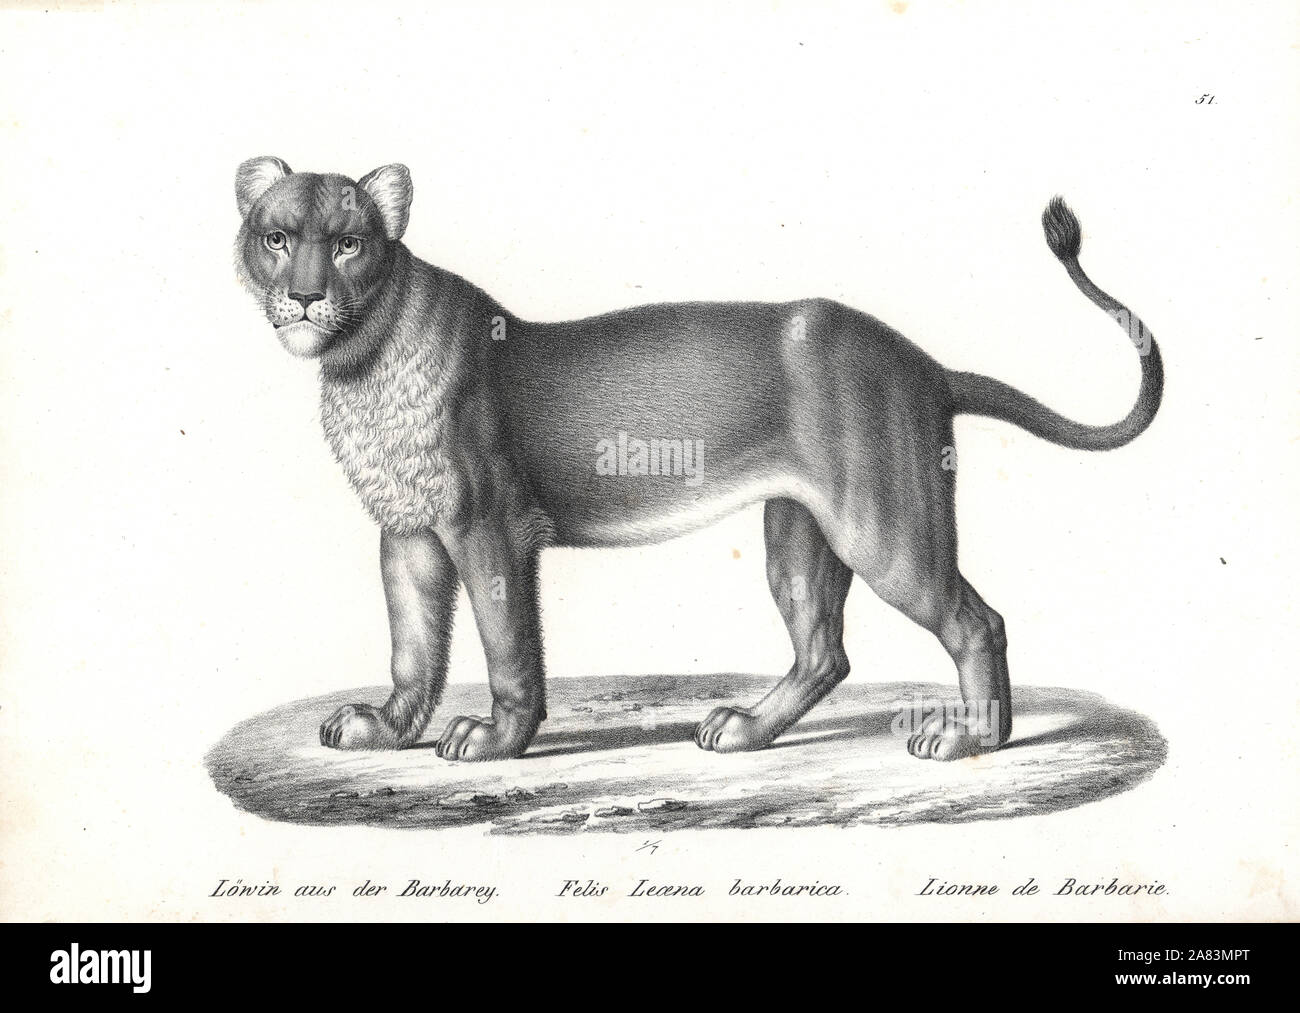 Barbary lion, female, Panthera leo barbaricus (Felis leoena barbarica) extinct. Lithograph by Karl Joseph Brodtmann from Heinrich Rudolf Schinz's Illustrated Natural History of Men and Animals, 1836. Stock Photo